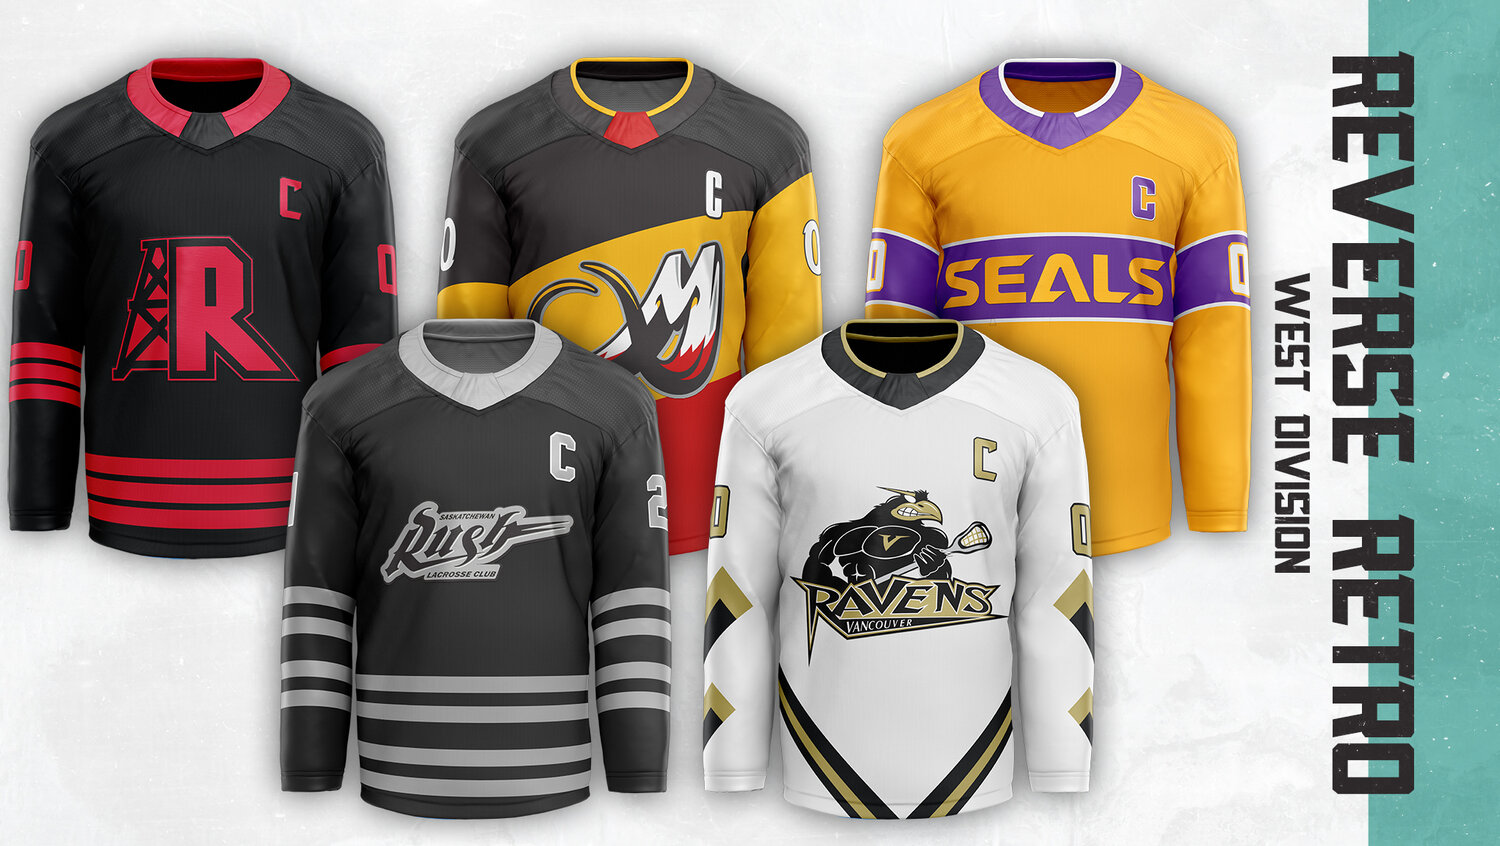 Reverse Retro 2 Concepts - East Division : hockeydesign